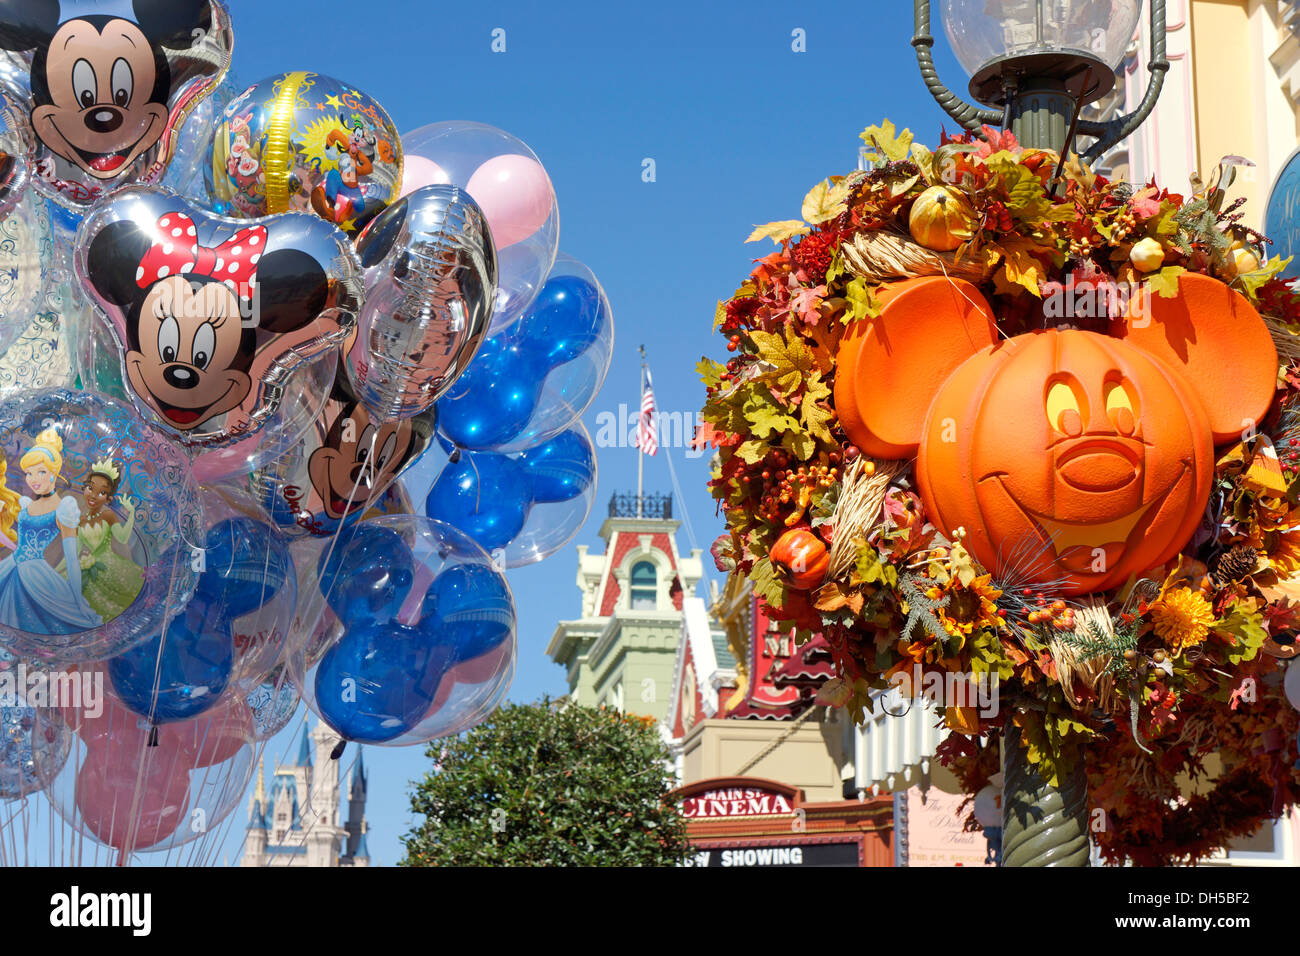 Halloween at Disney World Resort, Balloons Decorations Pumpkin Carved in Shape of Mickey Mouse Face, Orlando Florida Stock Photo